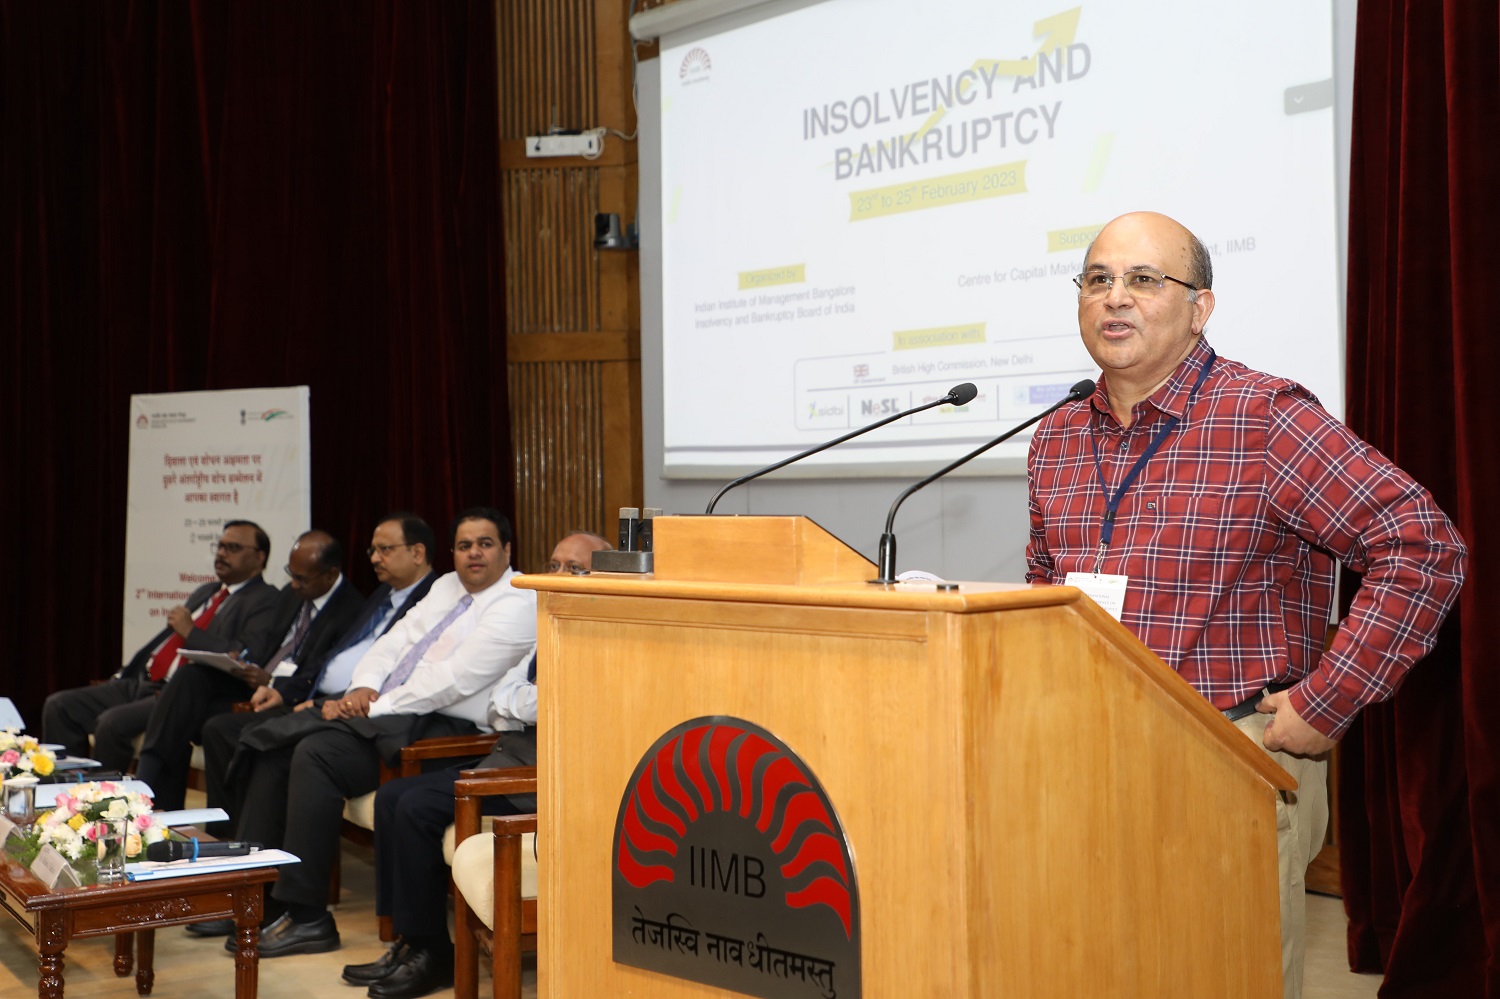 Prof. Rishikesha T Krishnan, Director, IIM Bangalore, welcomes the delegates and participants to the second International Research Conference on Insolvency and Bankruptcy.